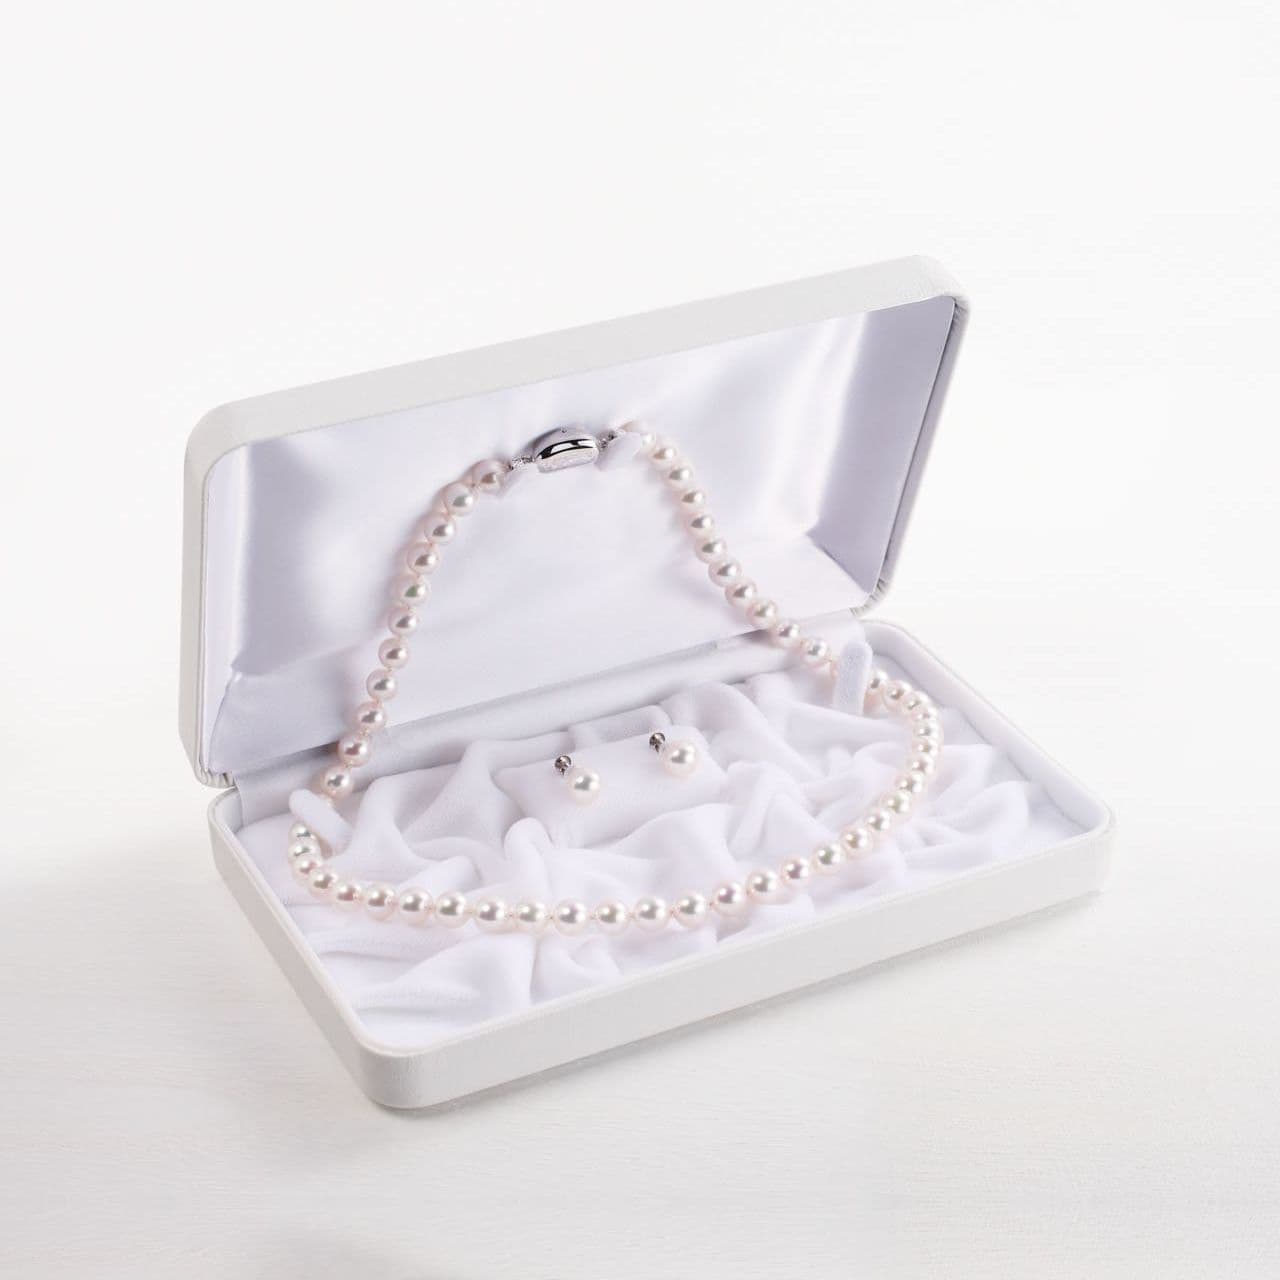 Akoya pearl necklace & pearl earrings set【M】/アコヤ真珠ネックレス＆イヤリングセット Mサイズ-4